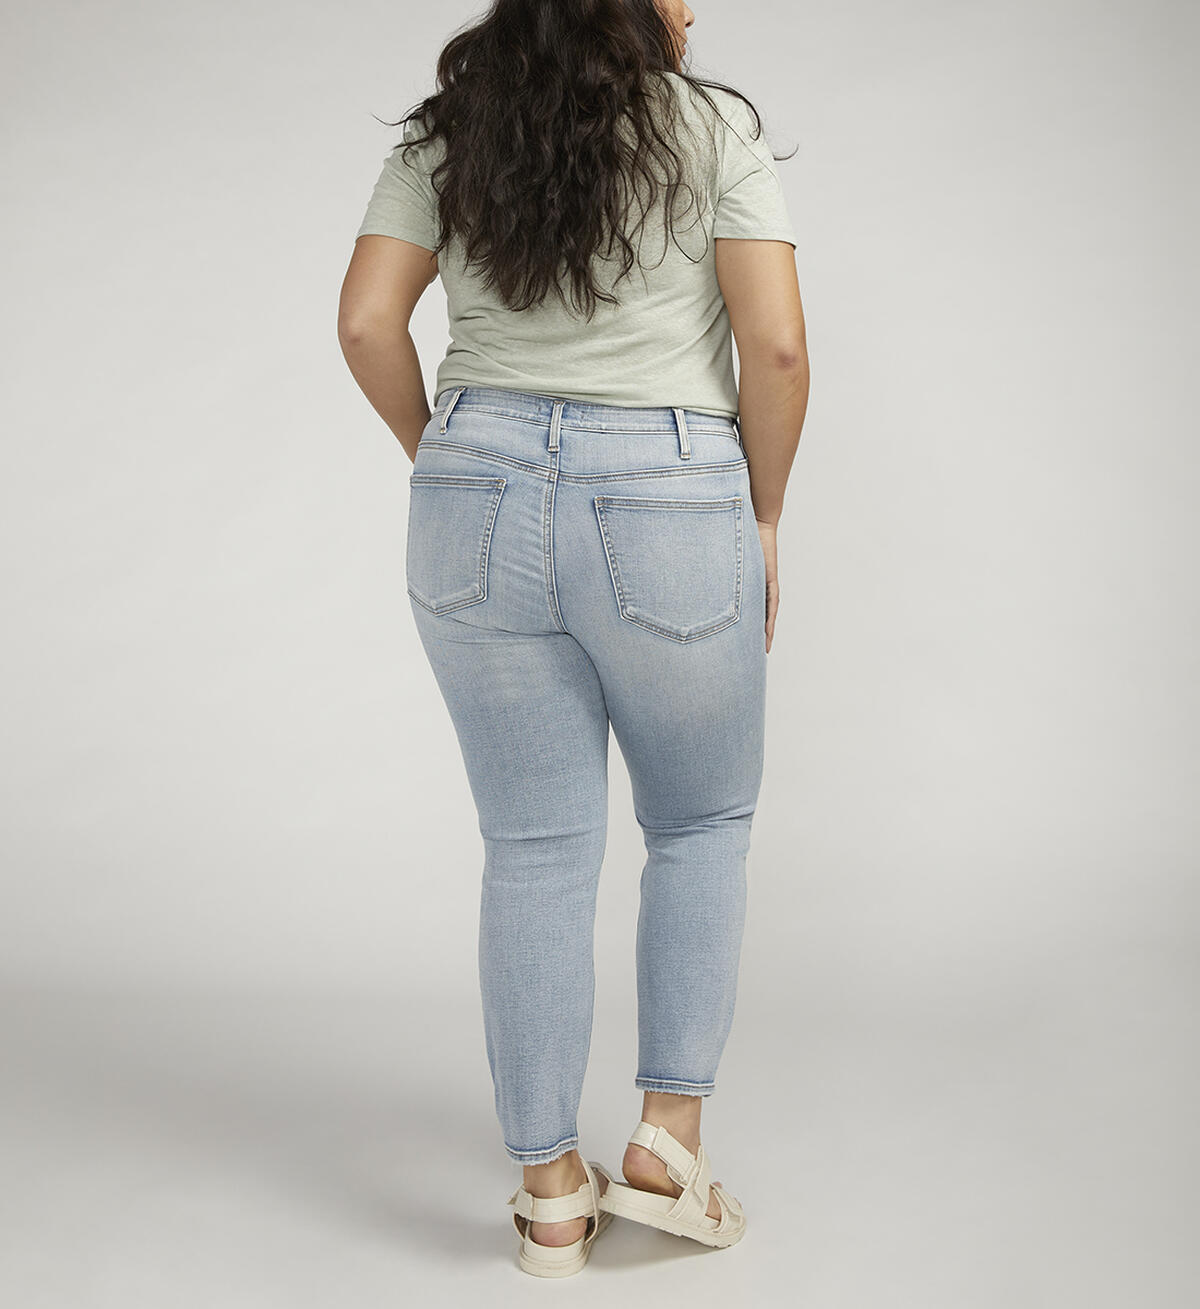 Most Wanted Mid Rise Ankle Straight Jeans Plus Size, , hi-res image number 1